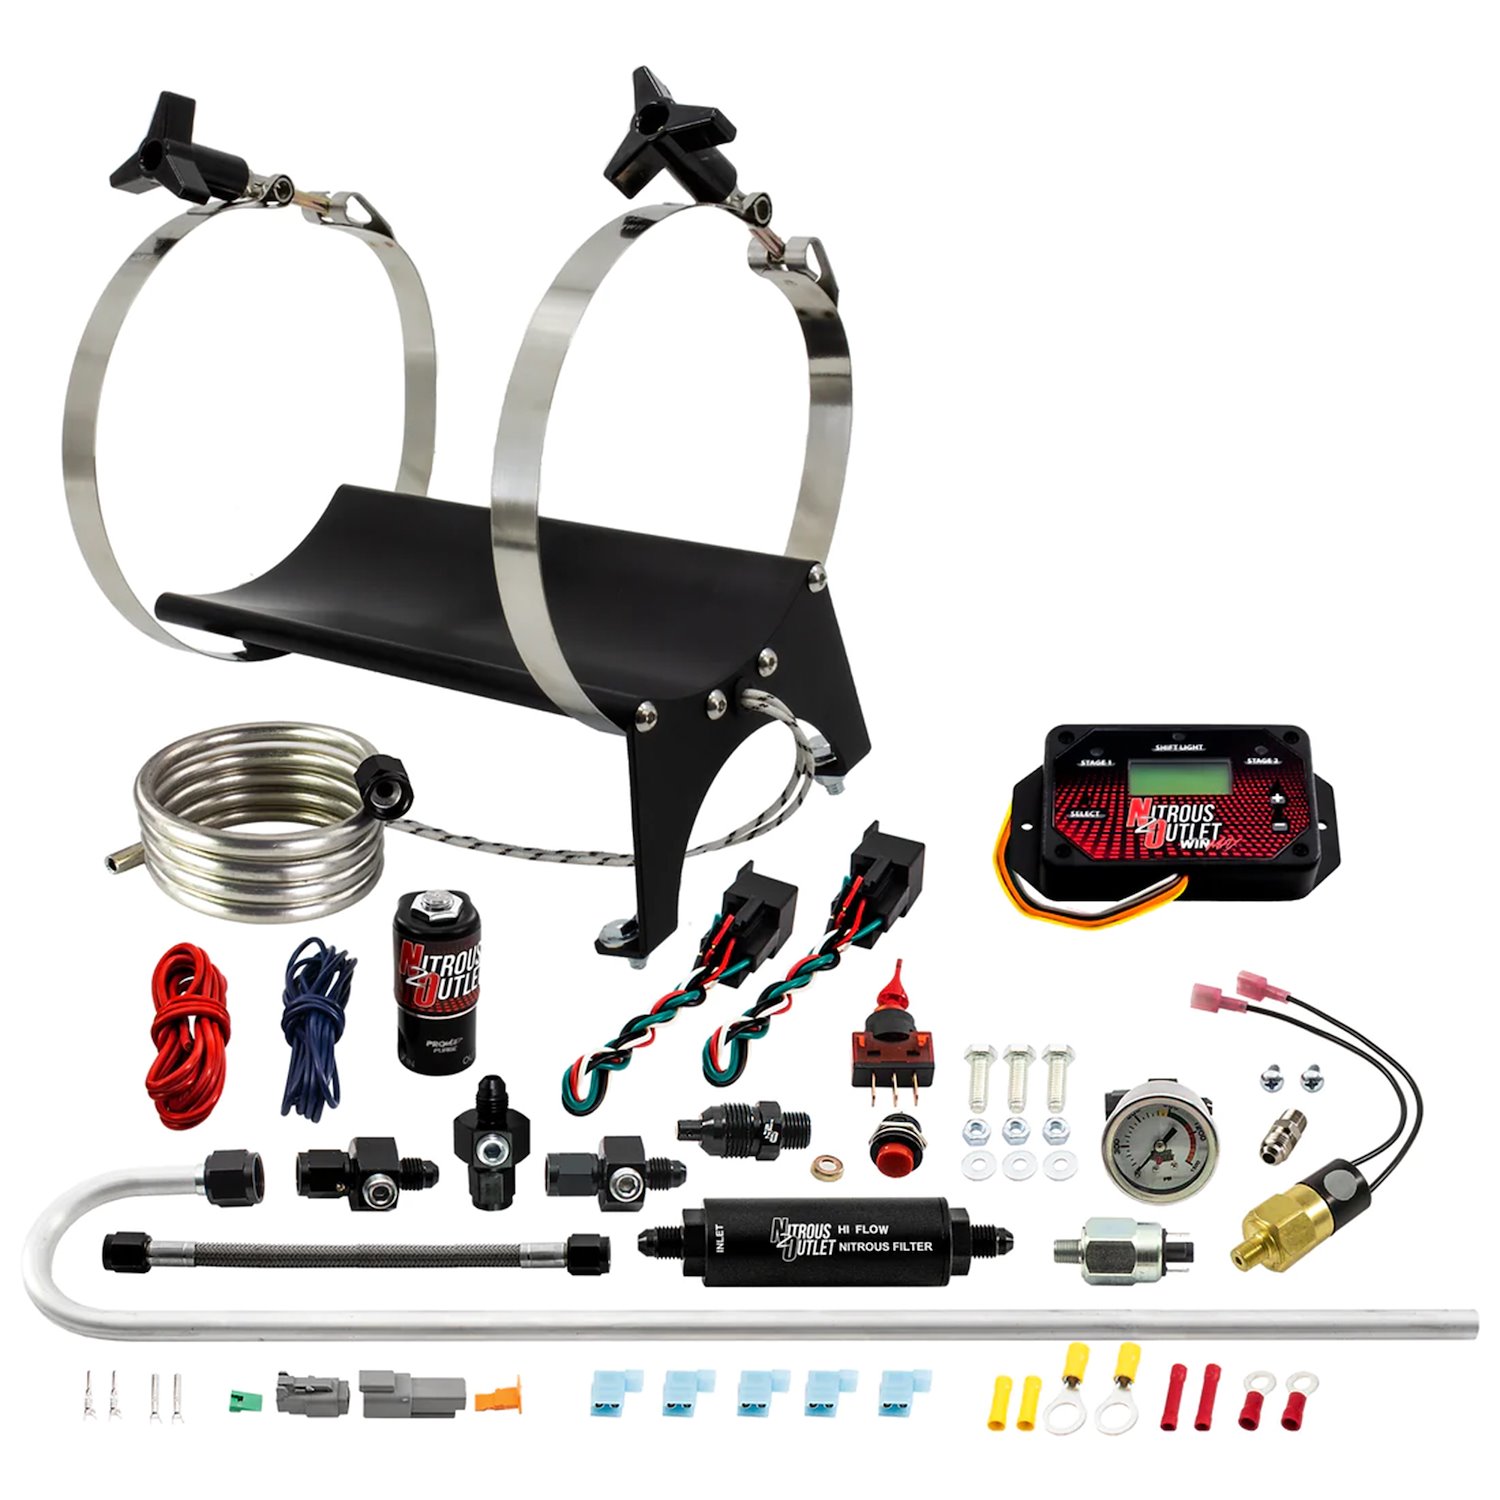 00-69002-H4 Ultimate Nitrous Accessory Package, WinMax, High Fuel Pressure/4AN